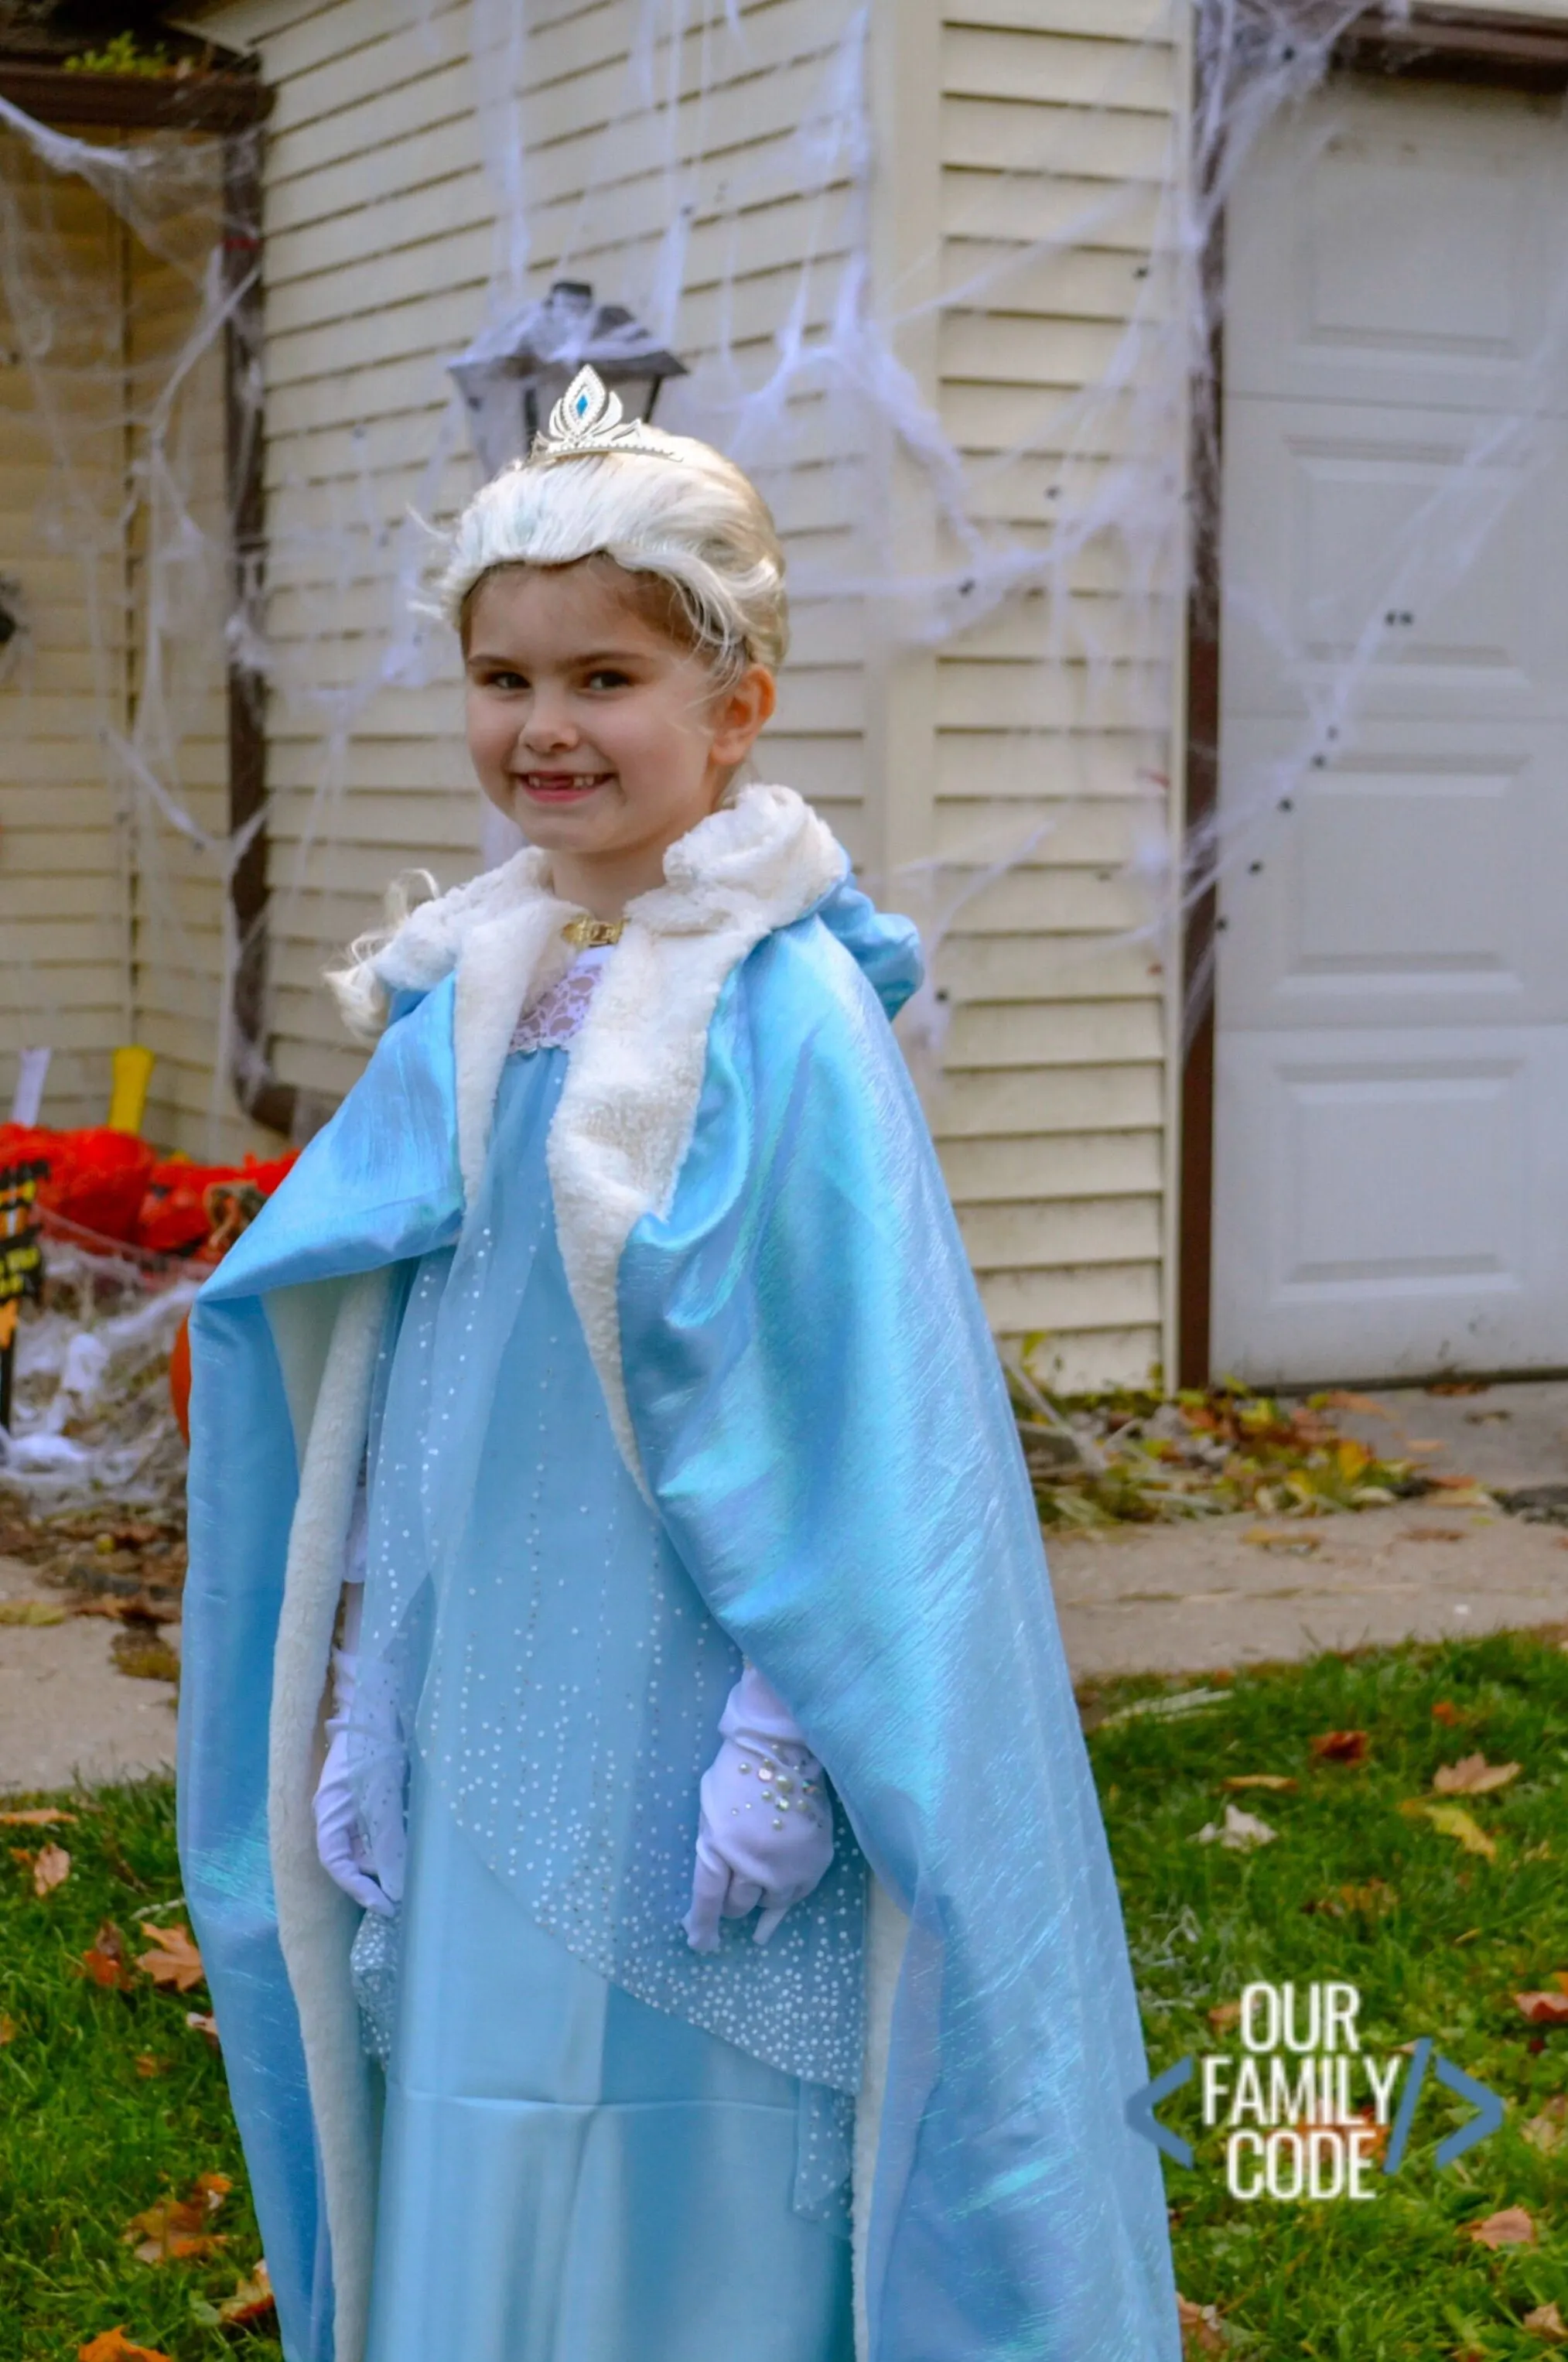 How to Make the Cutest Frozen Family Costume Ever from OurFamilyCode.com! #Frozencostumes #familyhalloweencostumes #halloweencostumesforkids #besthalloweencostumesforkids #elsacostume #annacostume #elsaandannacostumes #kristoffcostume #olafcostume #bestfamilyhalloweencostumes